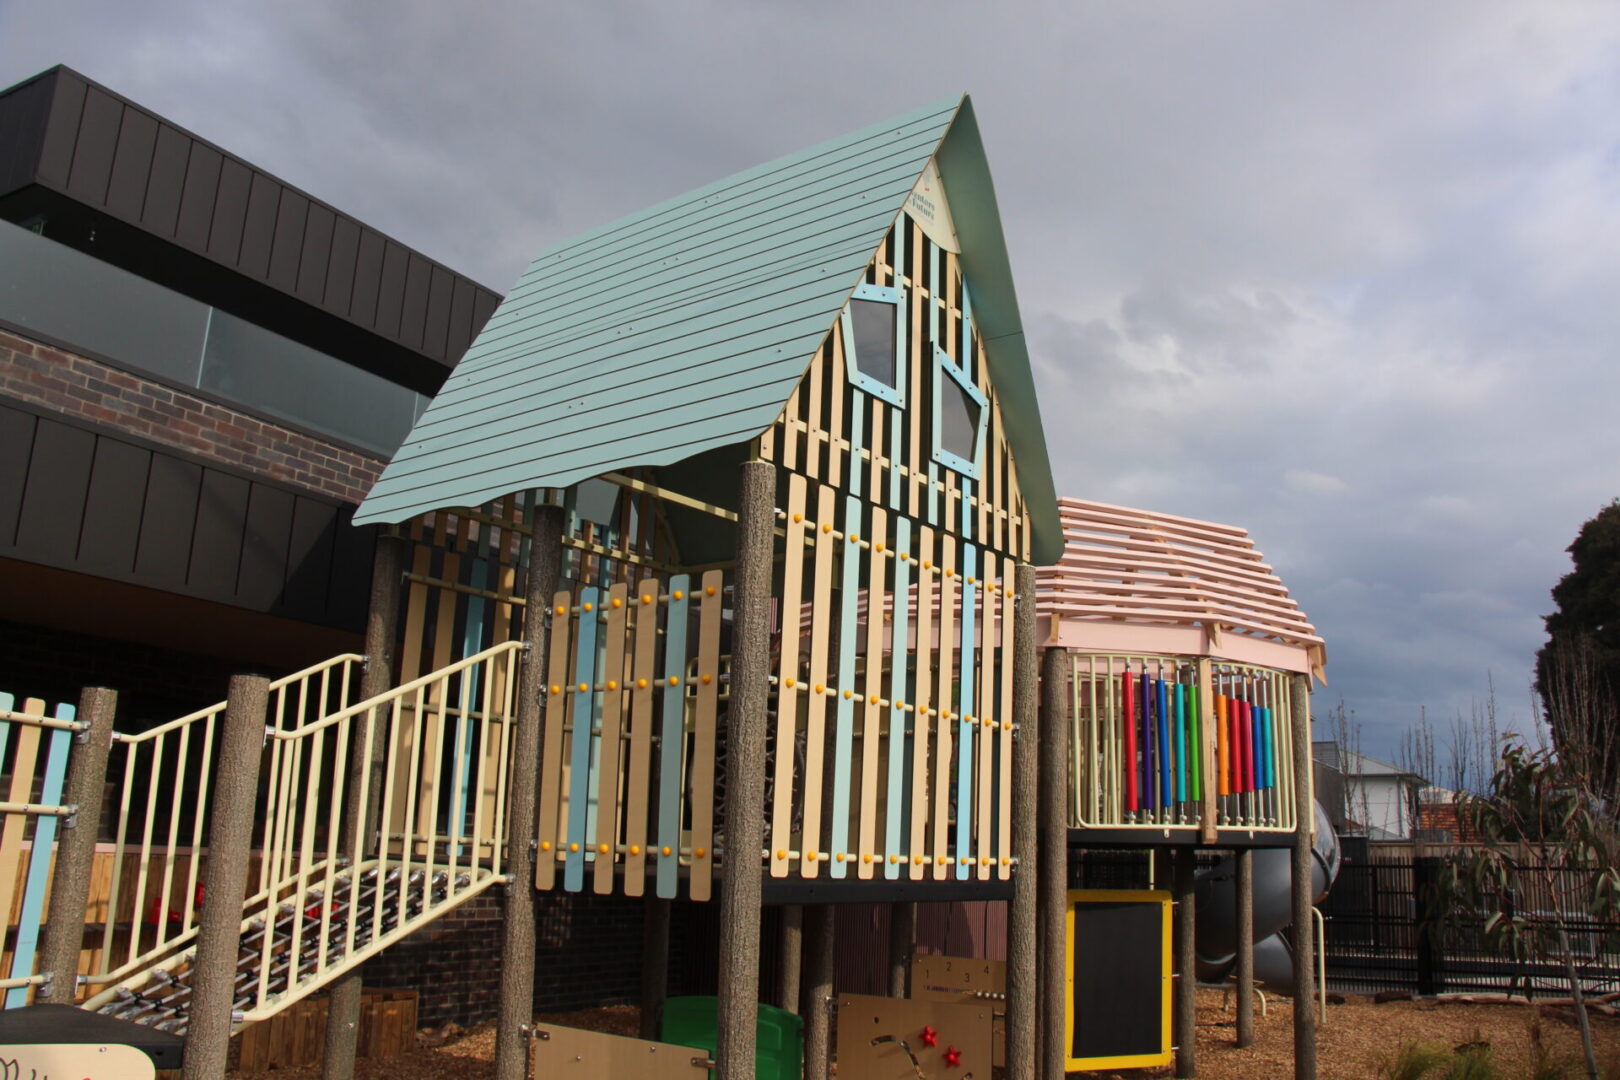 Colorful wooden huts for kids to play